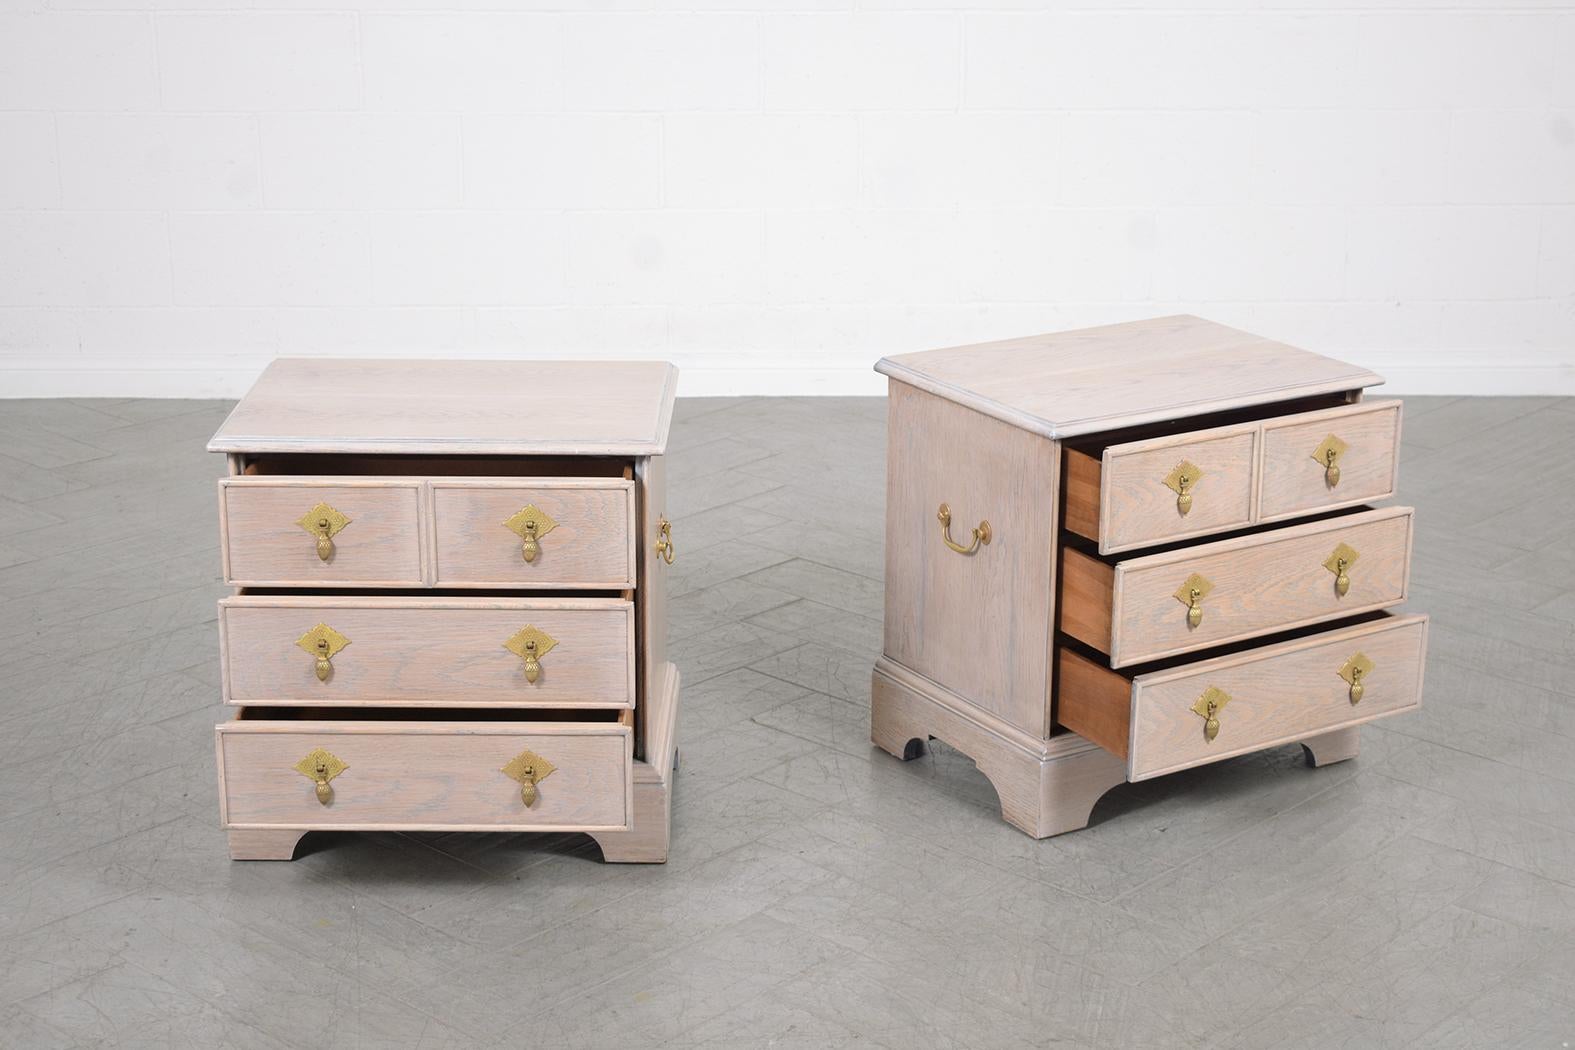 American Restored 1960s White Oak Bedside Tables with Whitewashed Finish & Brass Handles For Sale